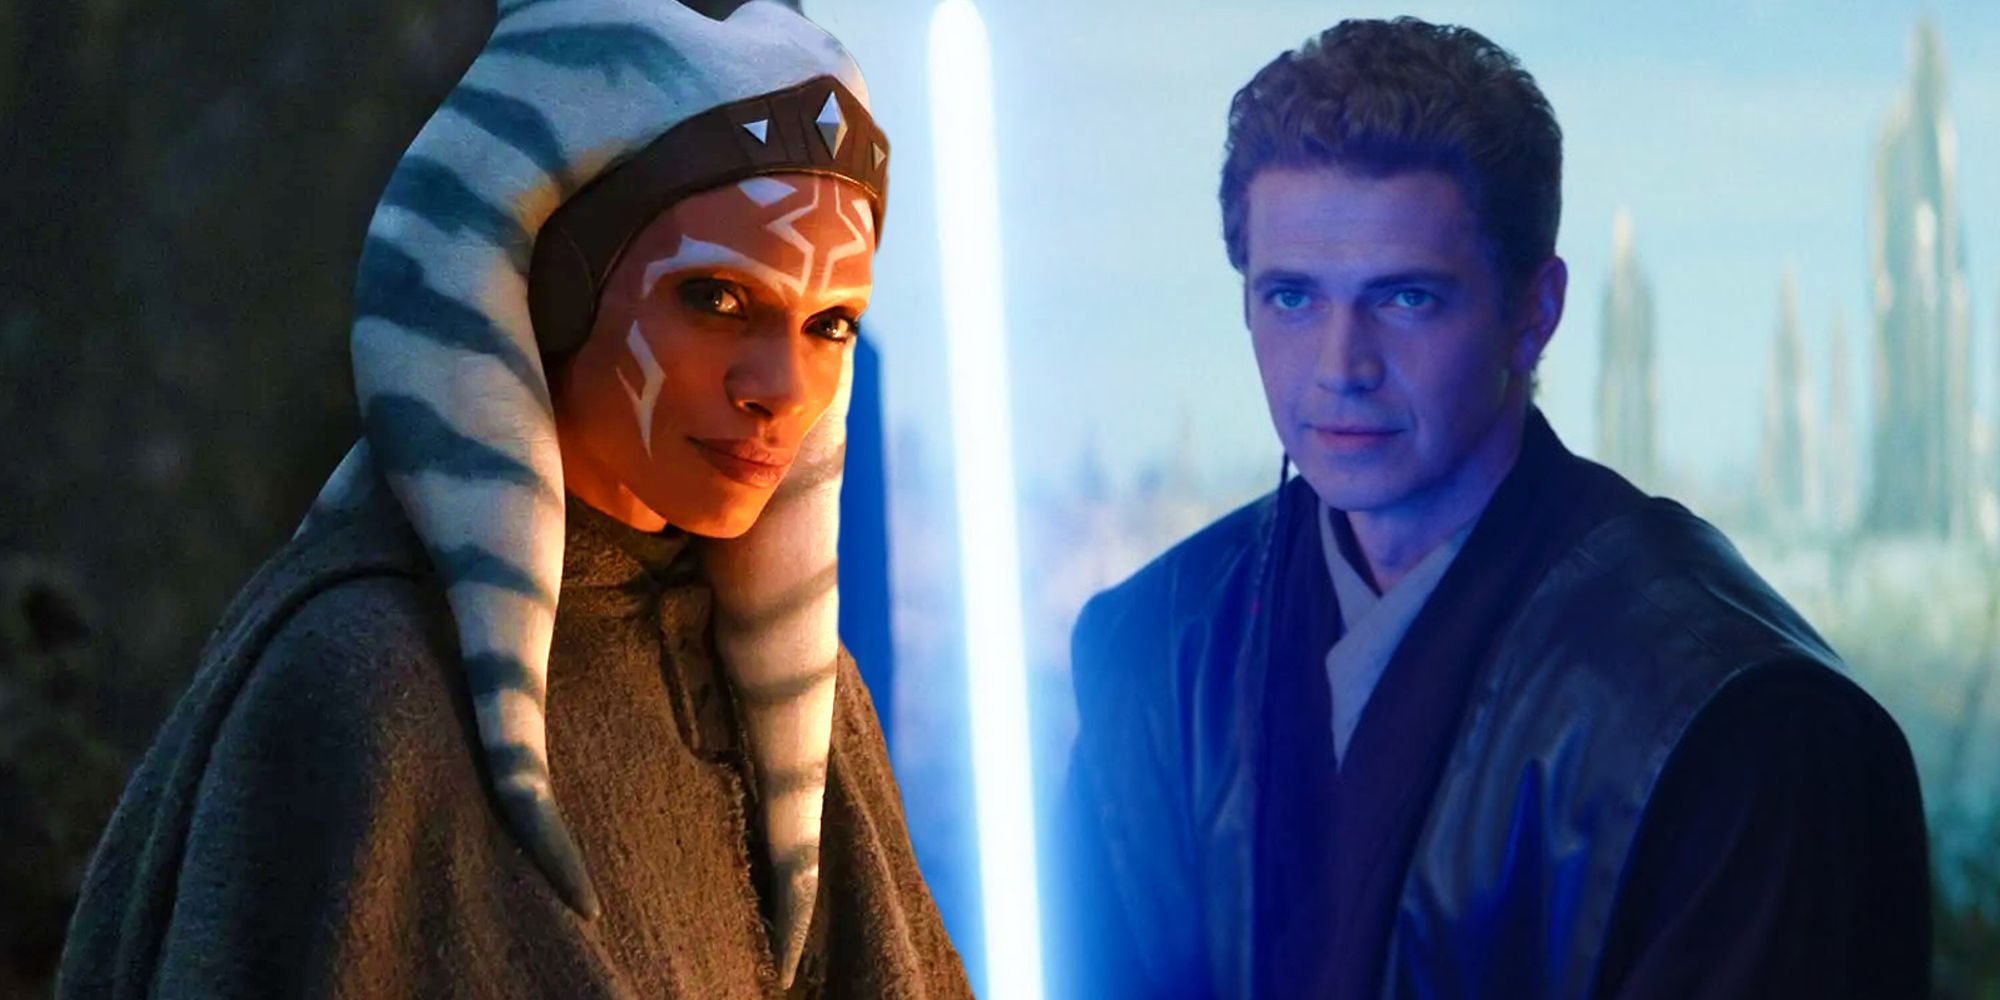 Hayden Christensen & Rosario Dawson Proved They're Real-Life Heroes In A Fan Expo Incident